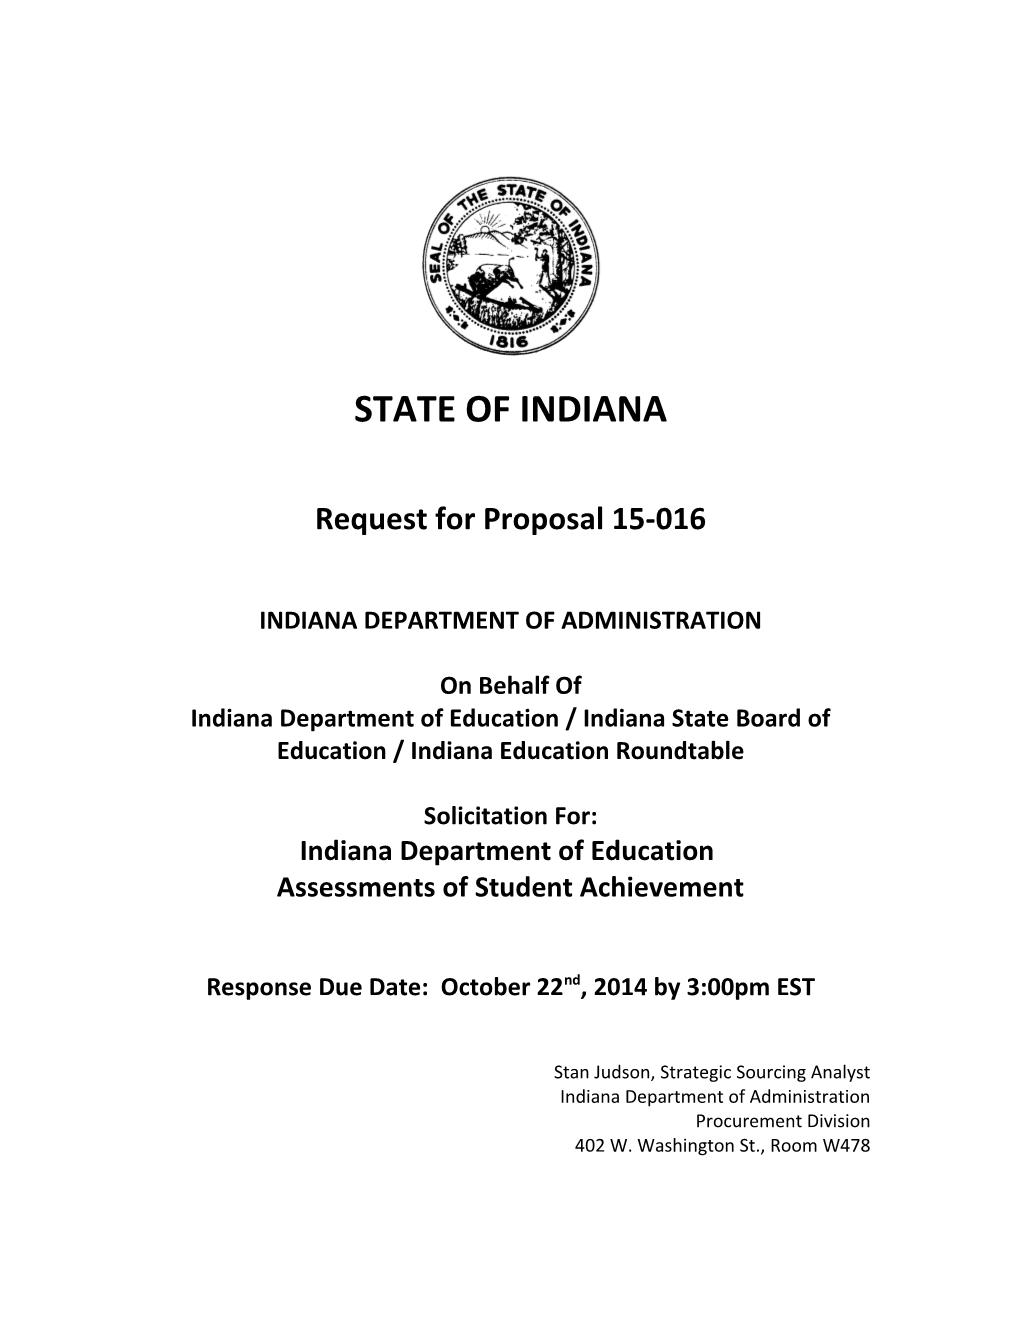 Indiana Department of Education/ Indiana State Board of Education/ Indiana Education Roundtable